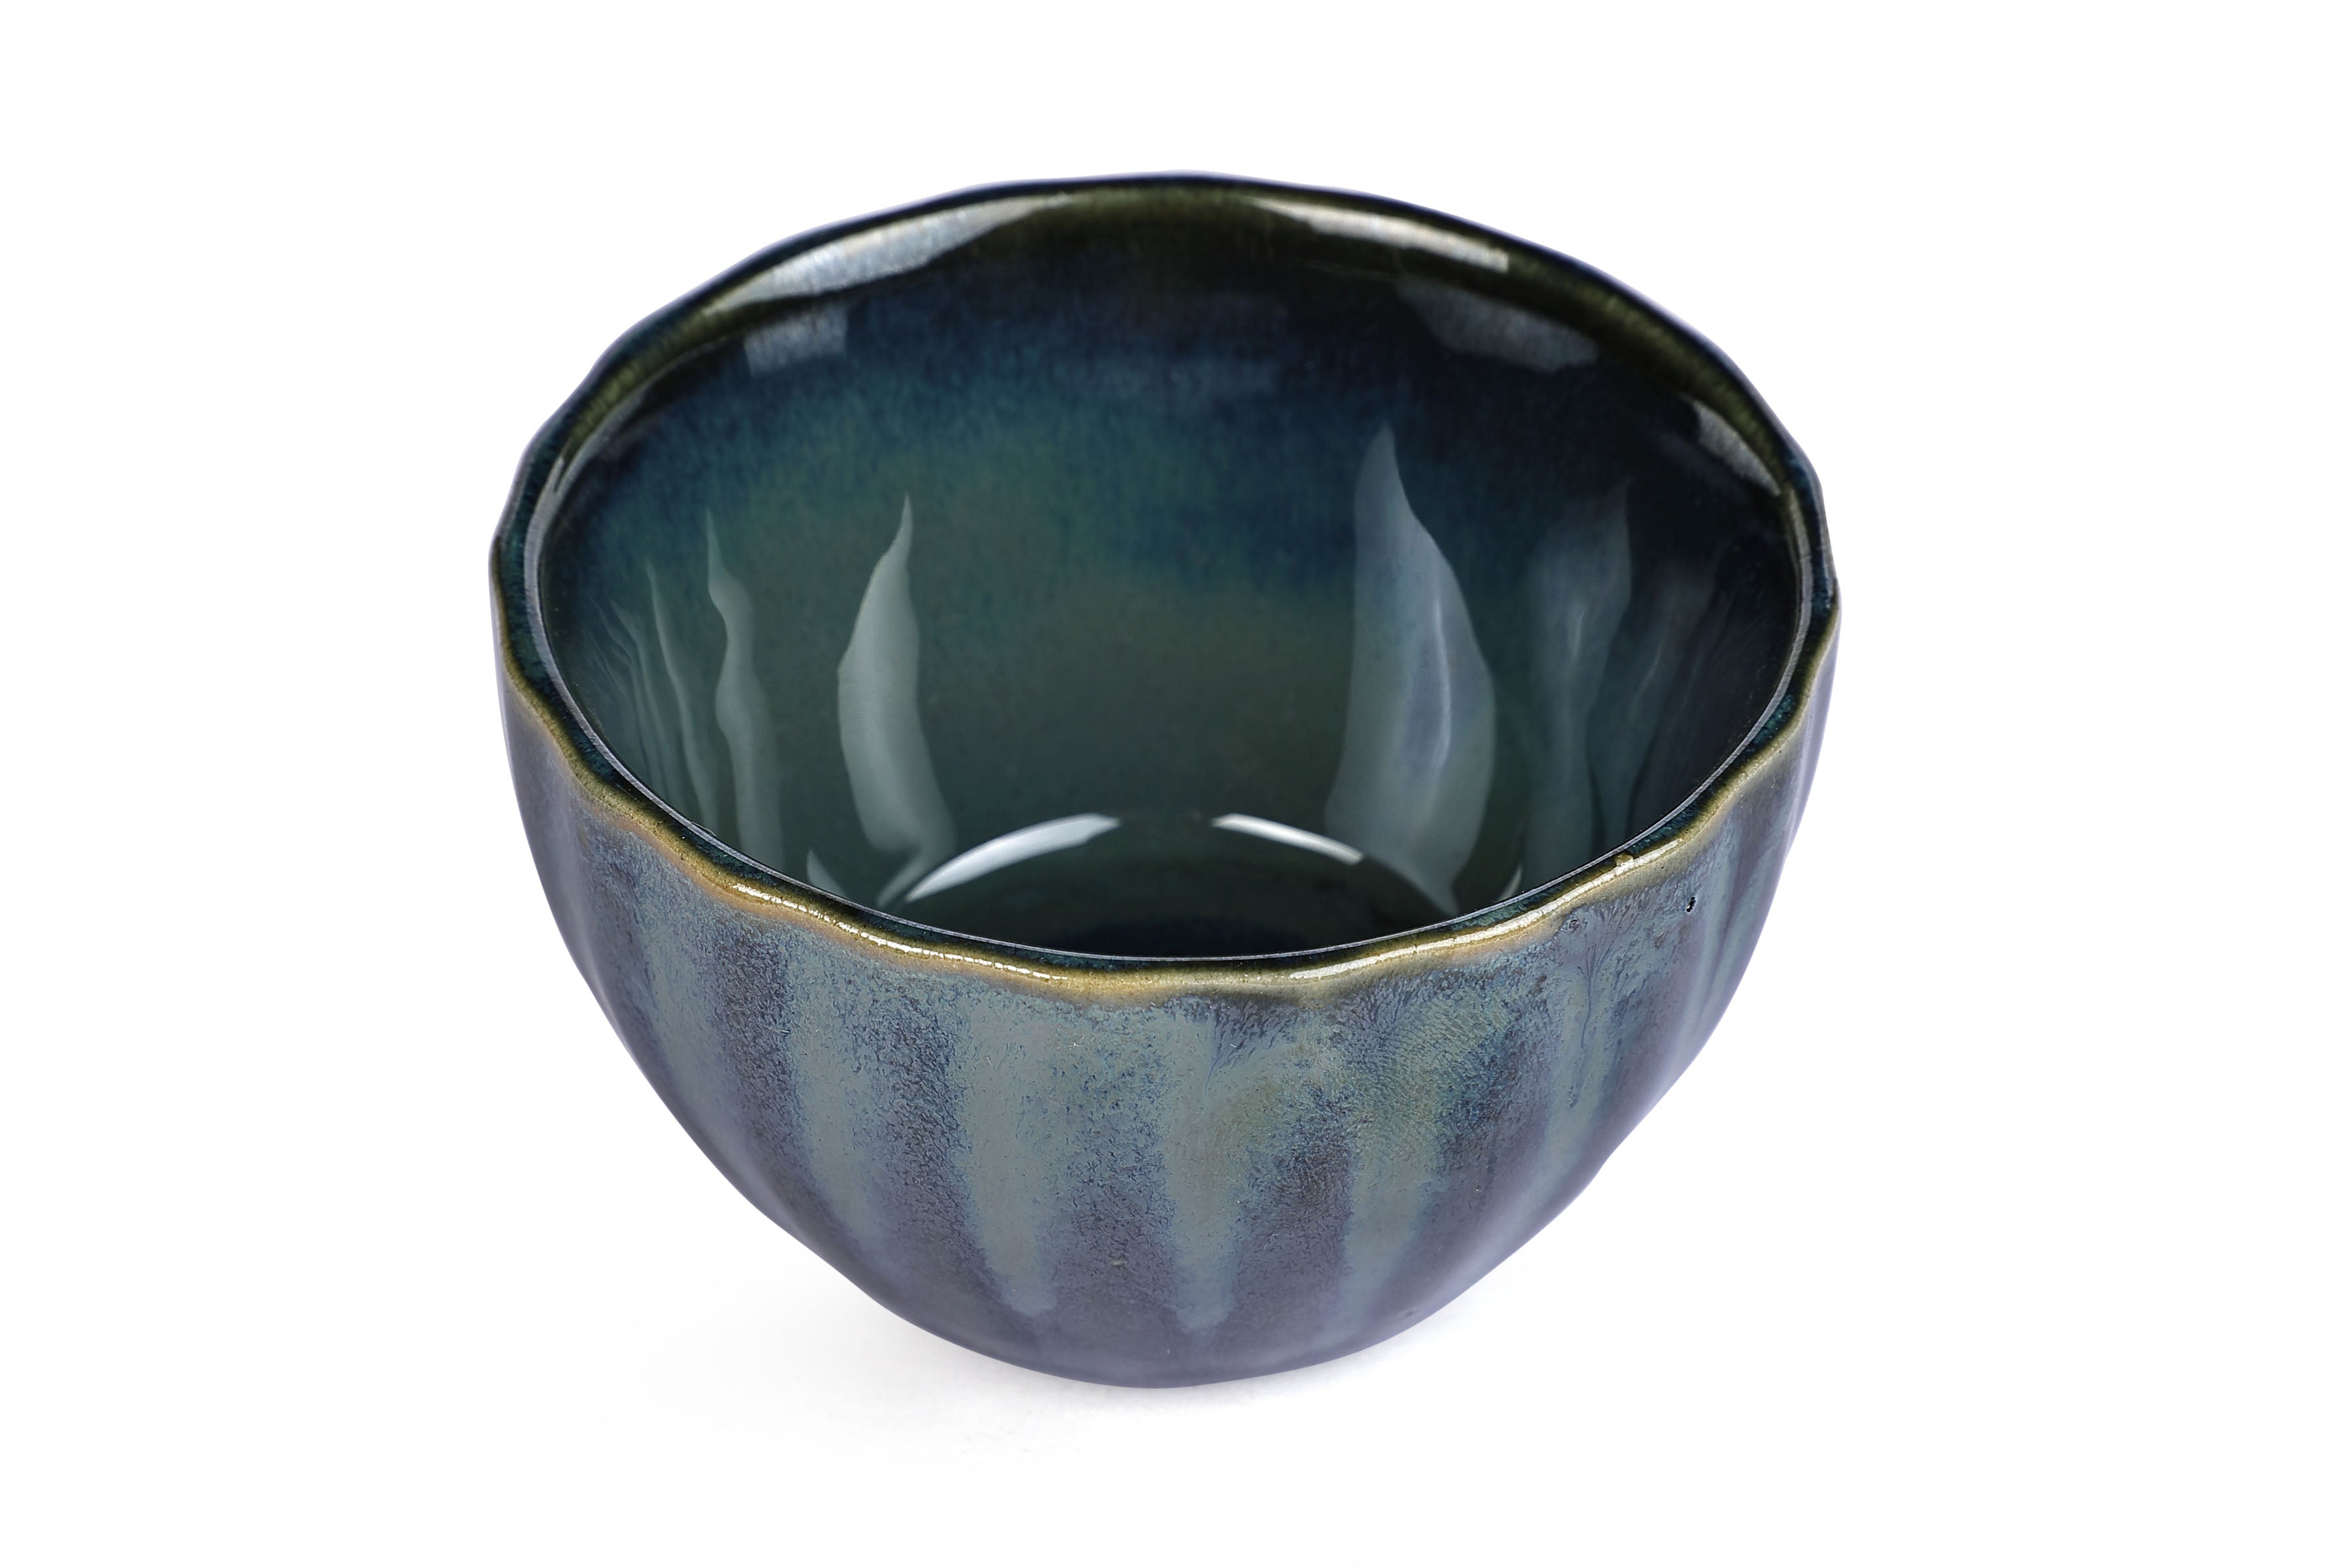 Ceramic Shaded Snack Bowl, Green  3.5x2.2 Inches (Set of 2)